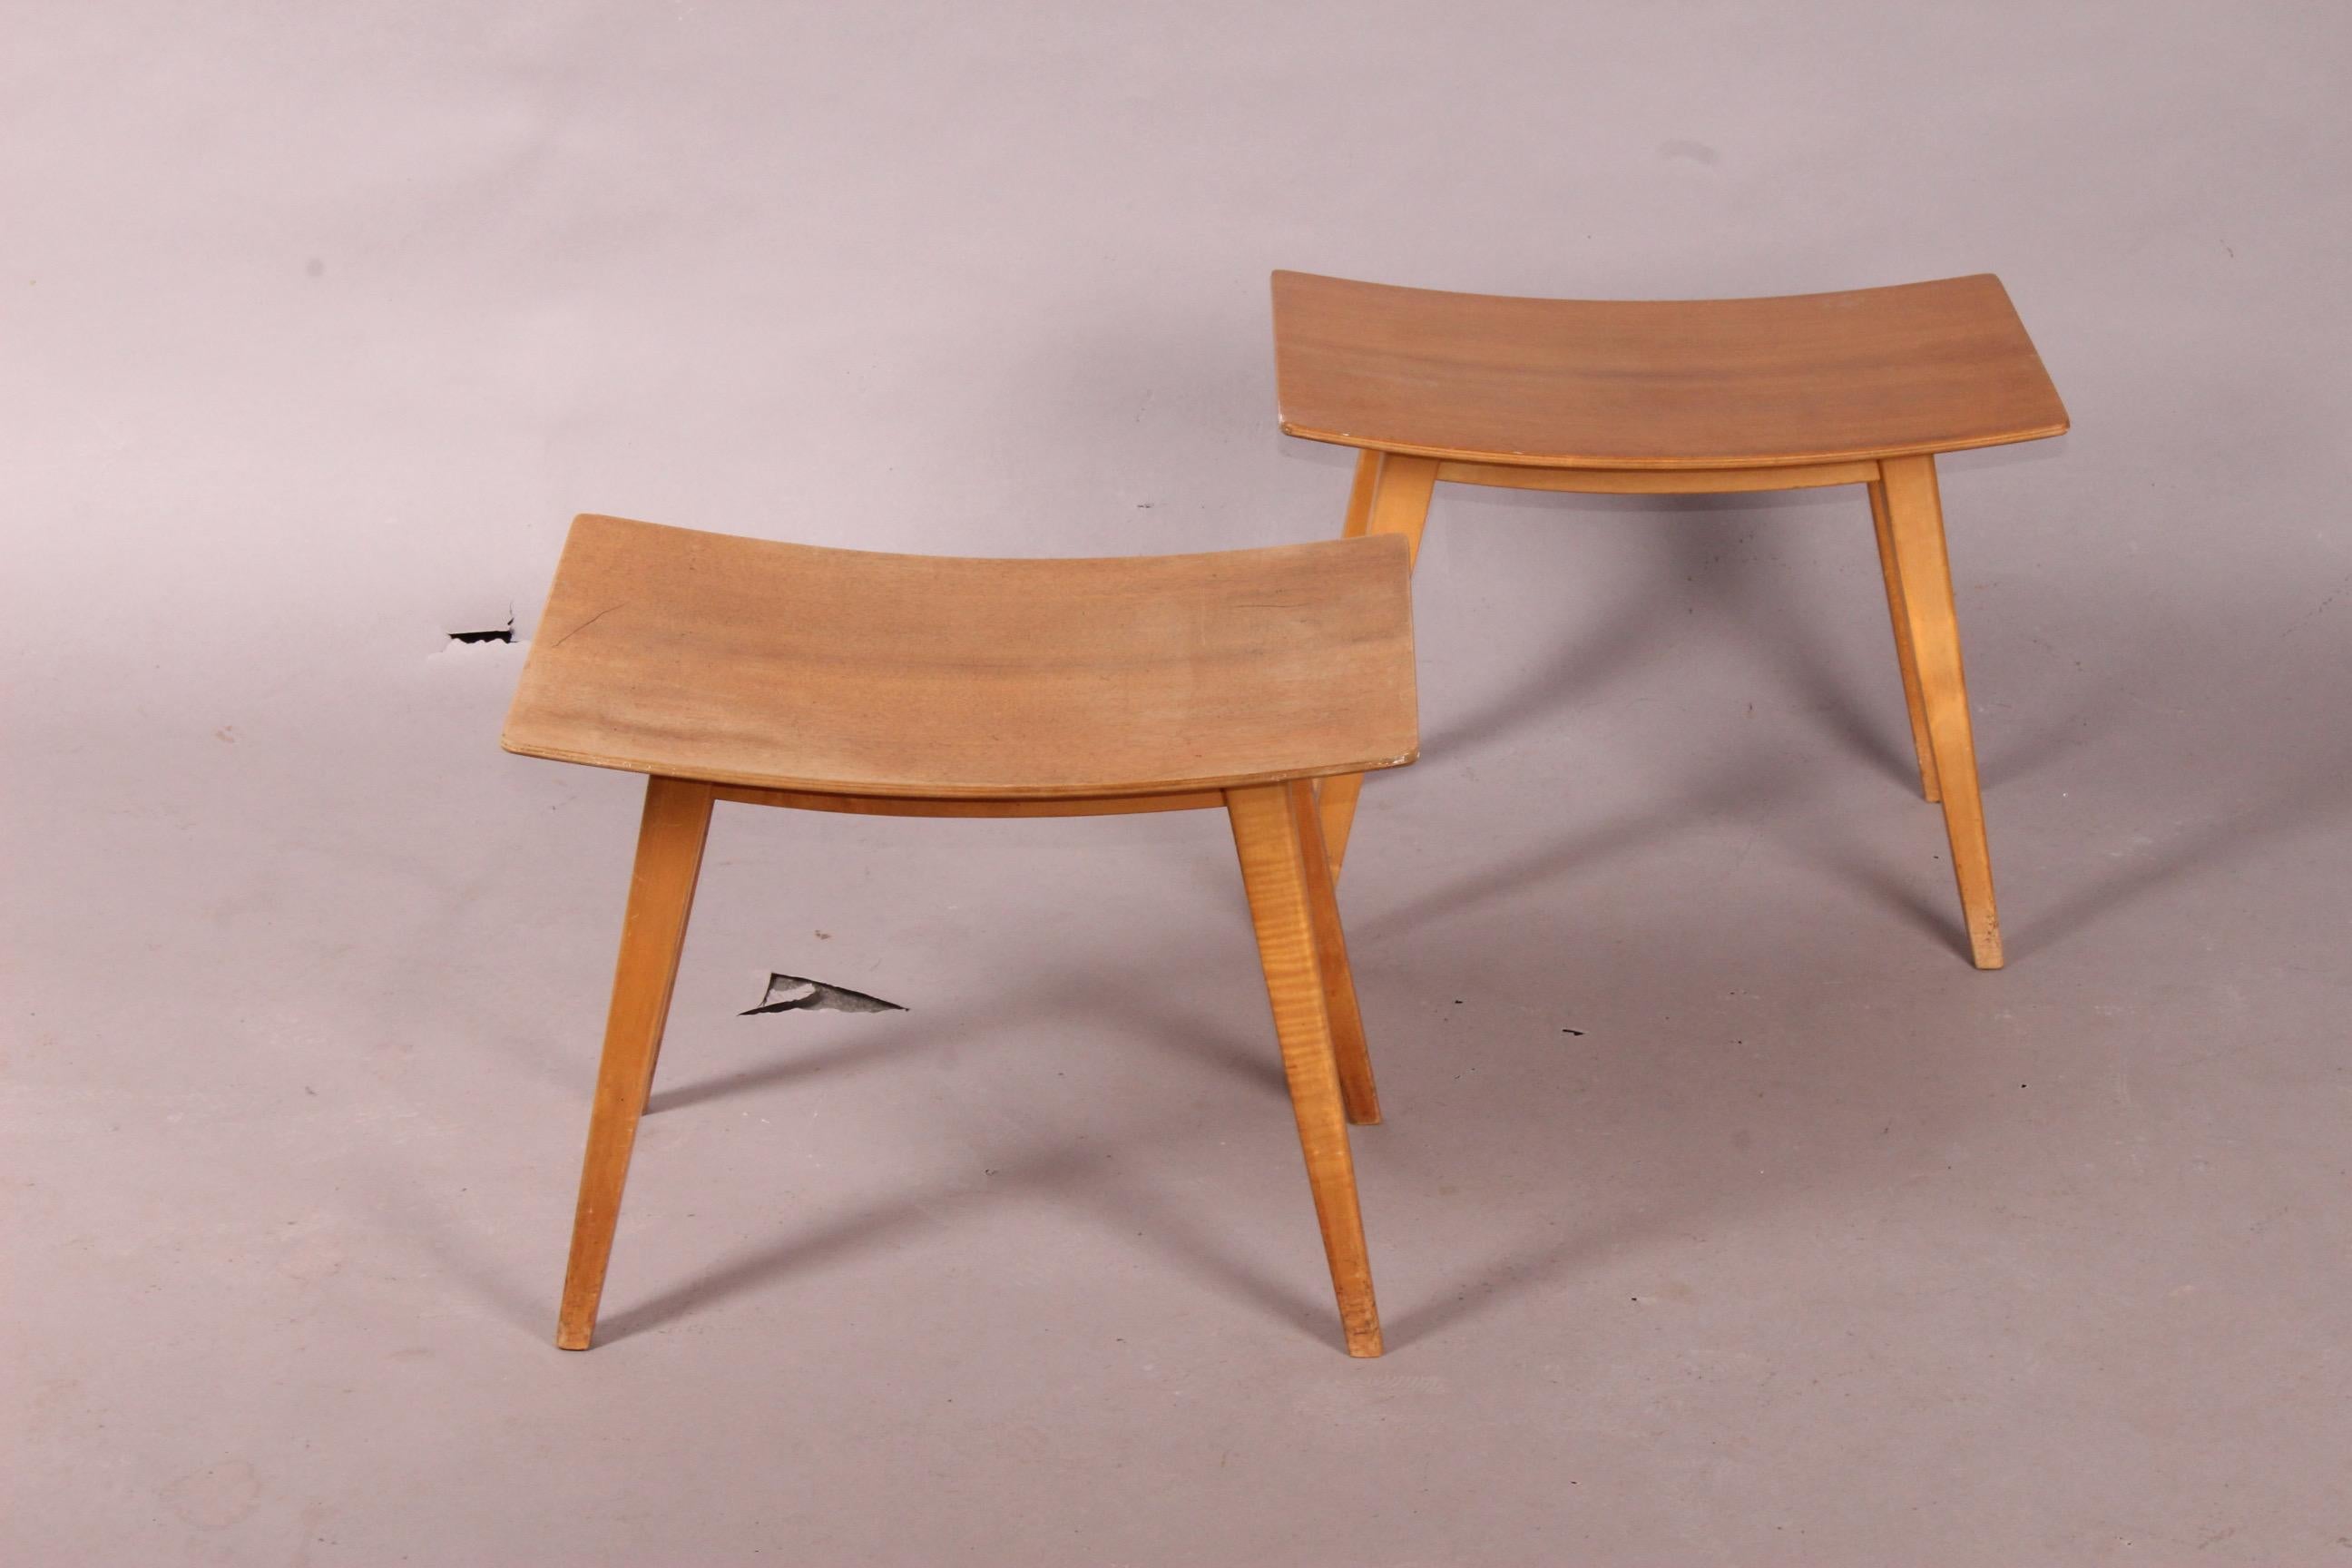 Pair of curved wood stools.